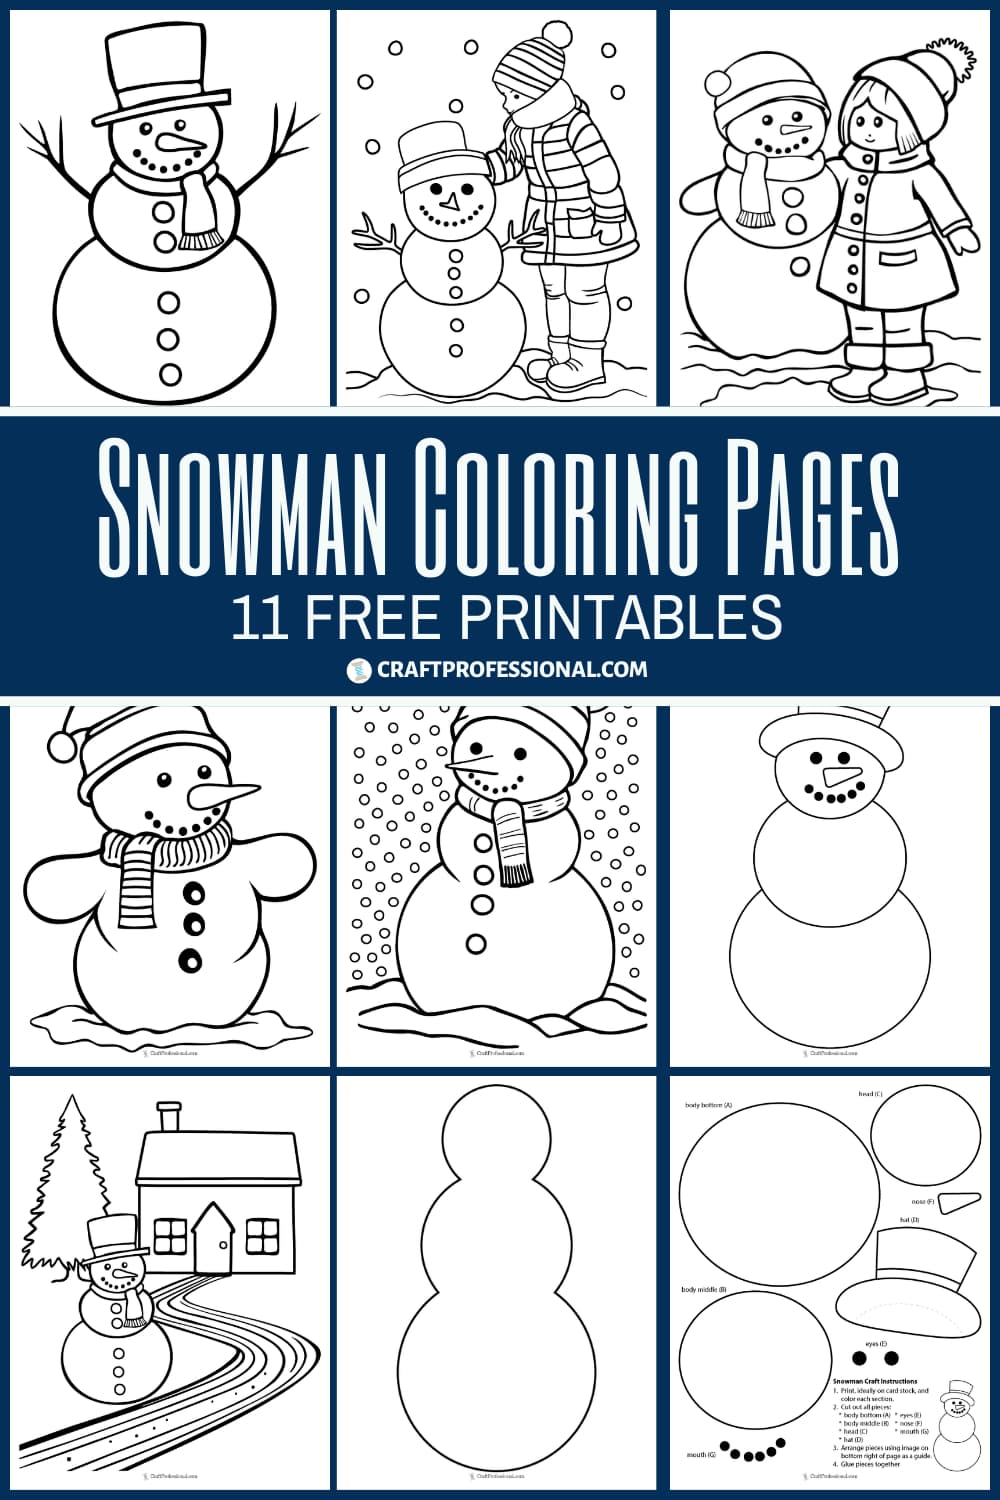 Snowman coloring pages. 11 free printables.